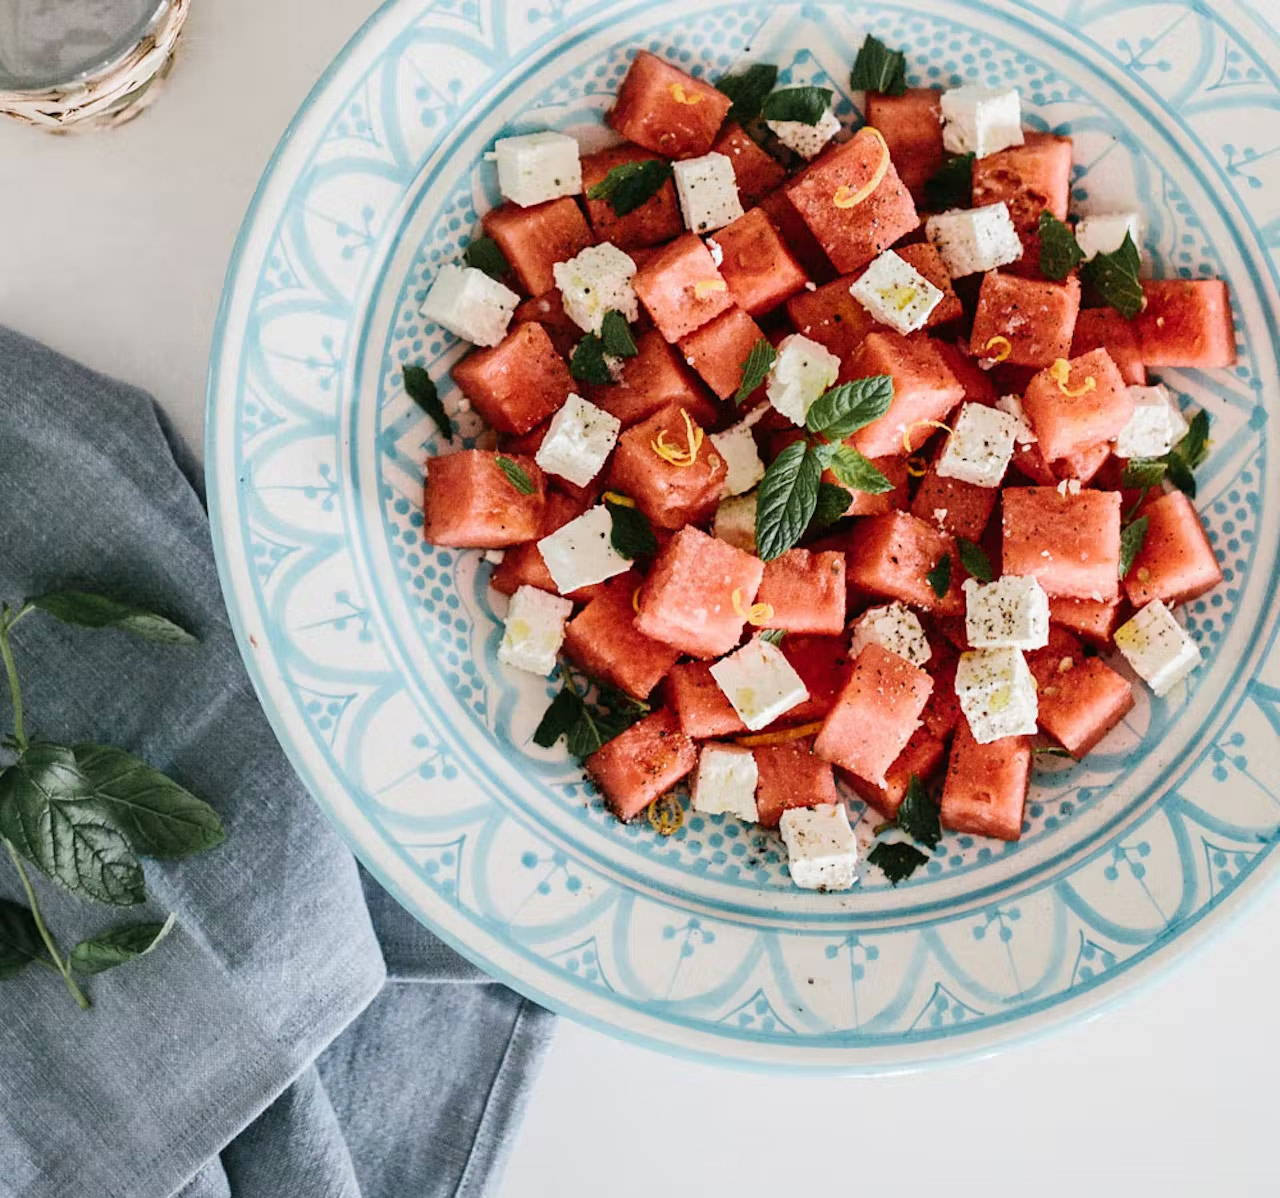 Watermelon salad with Feta and Mint